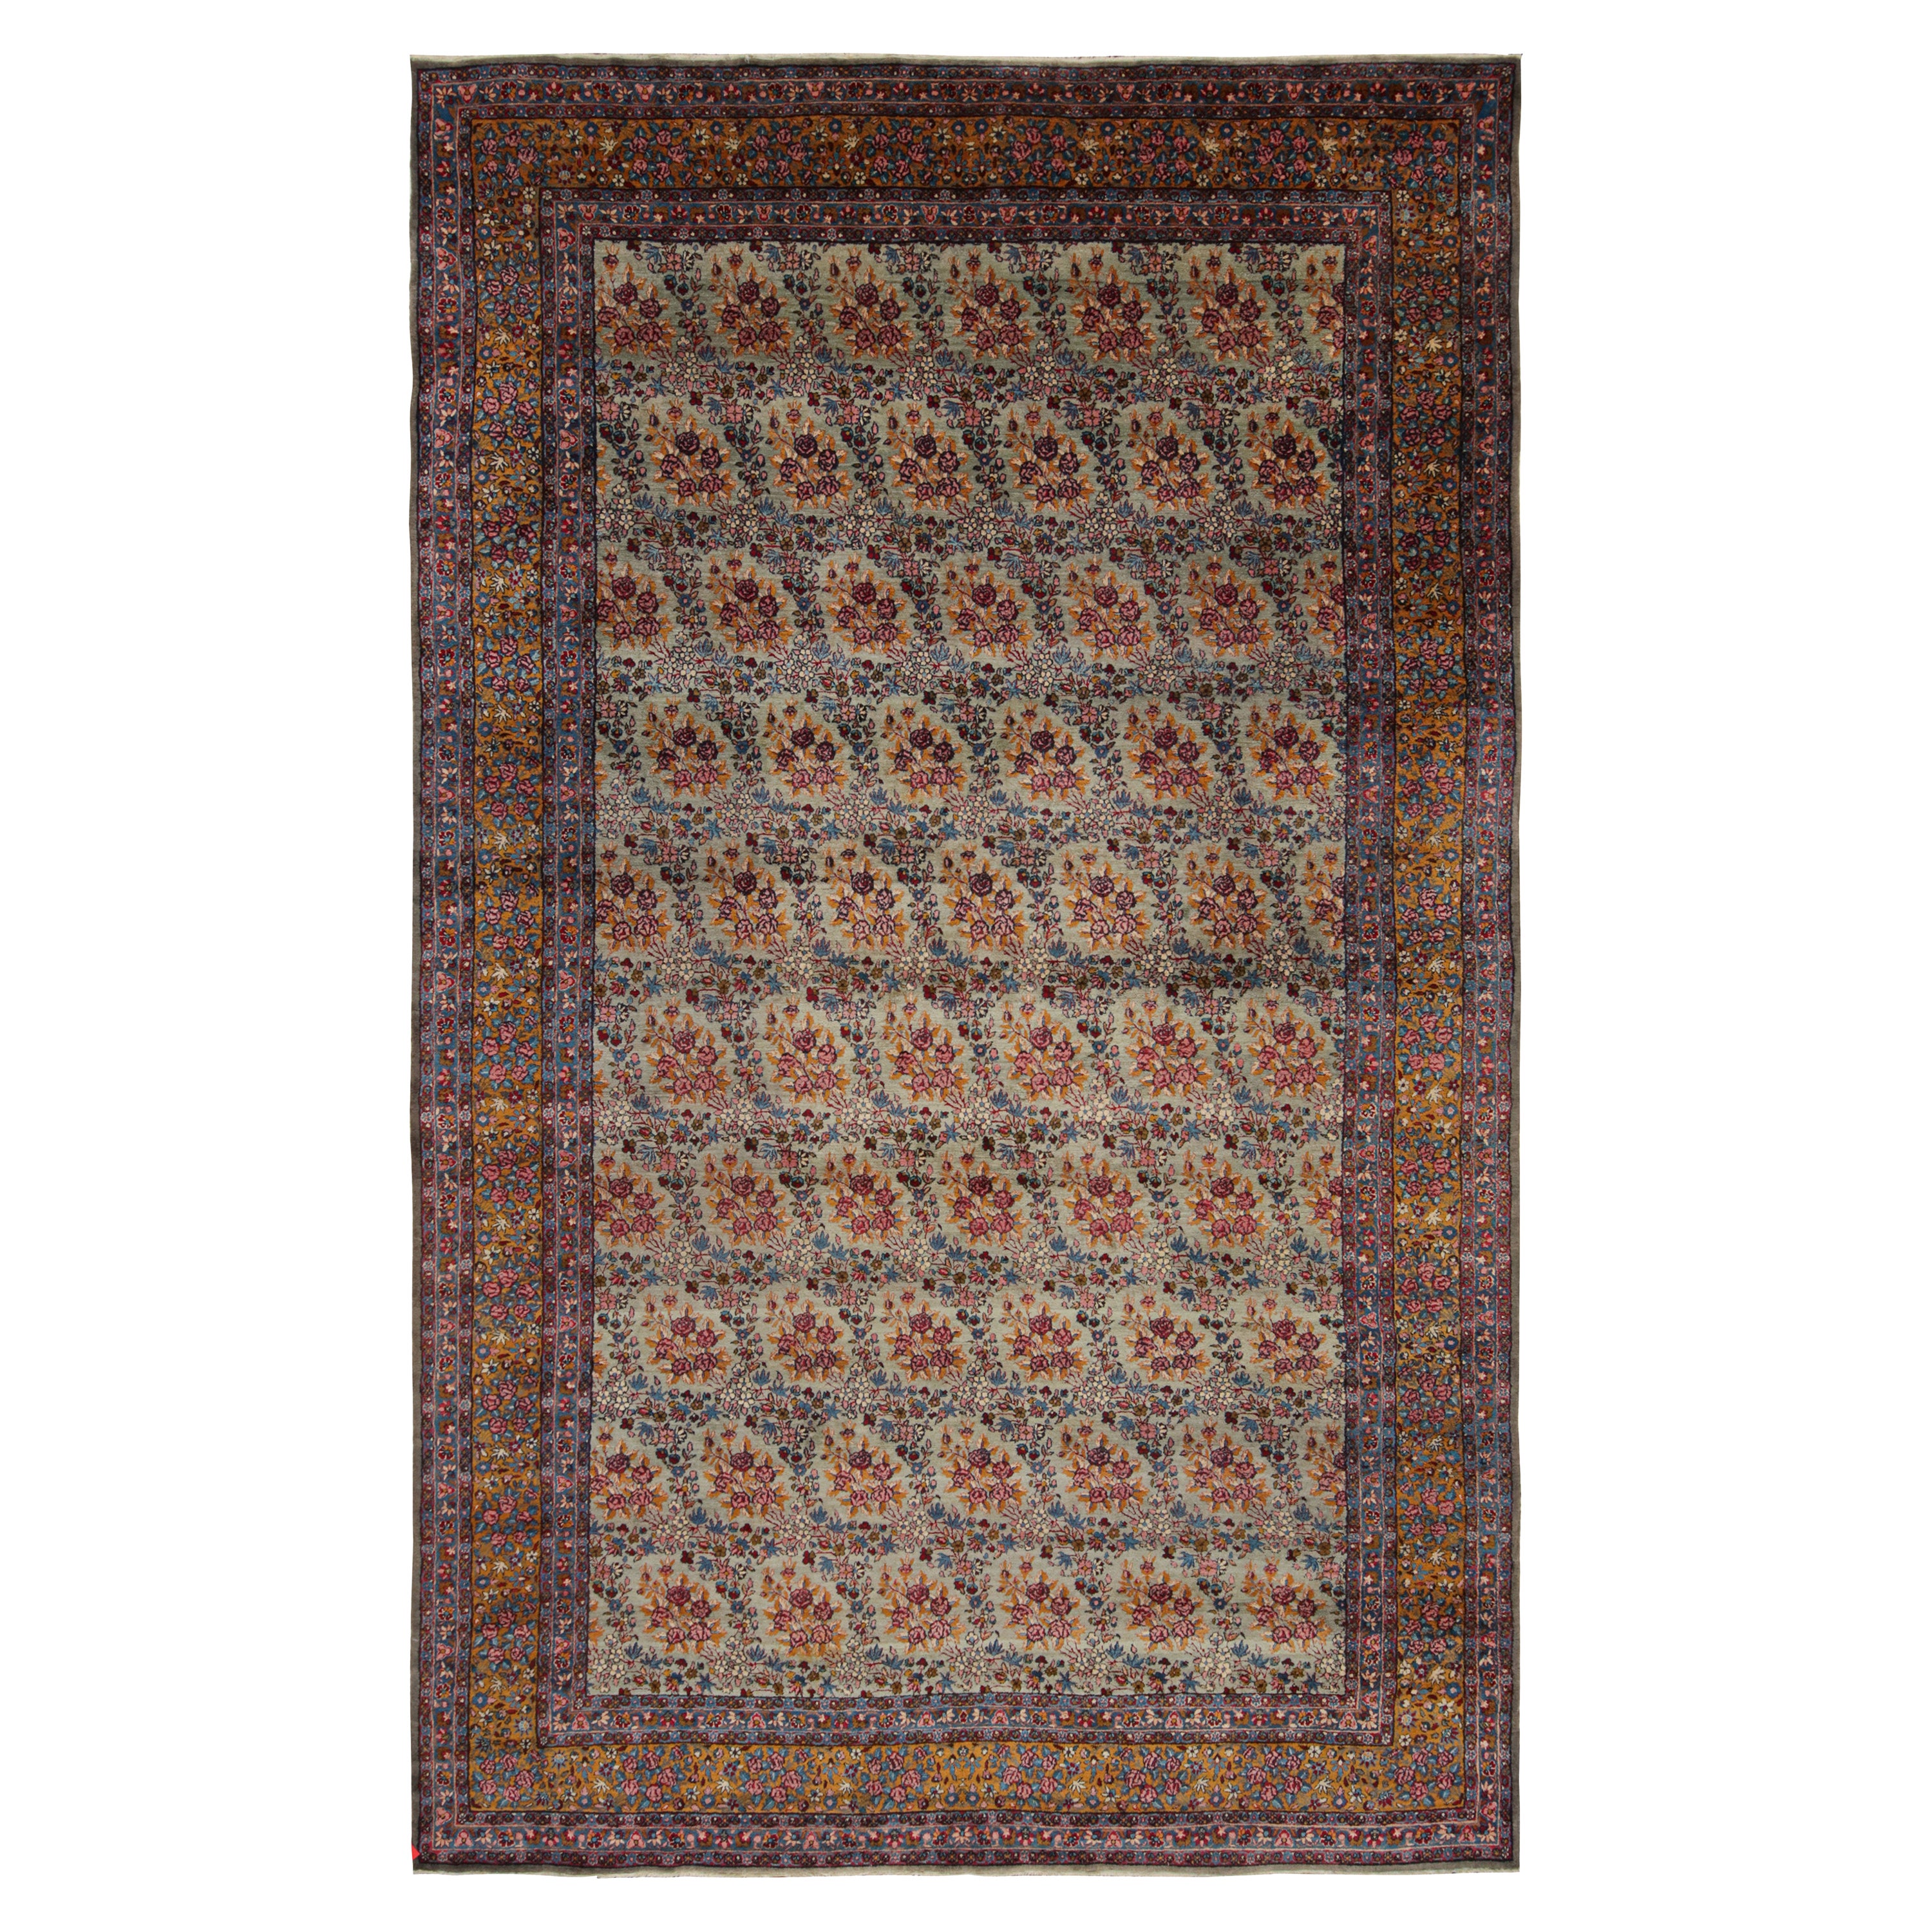 Antique Persian Kerman Rug with Polychromatic Floral Patterns by Rug & Kilim For Sale